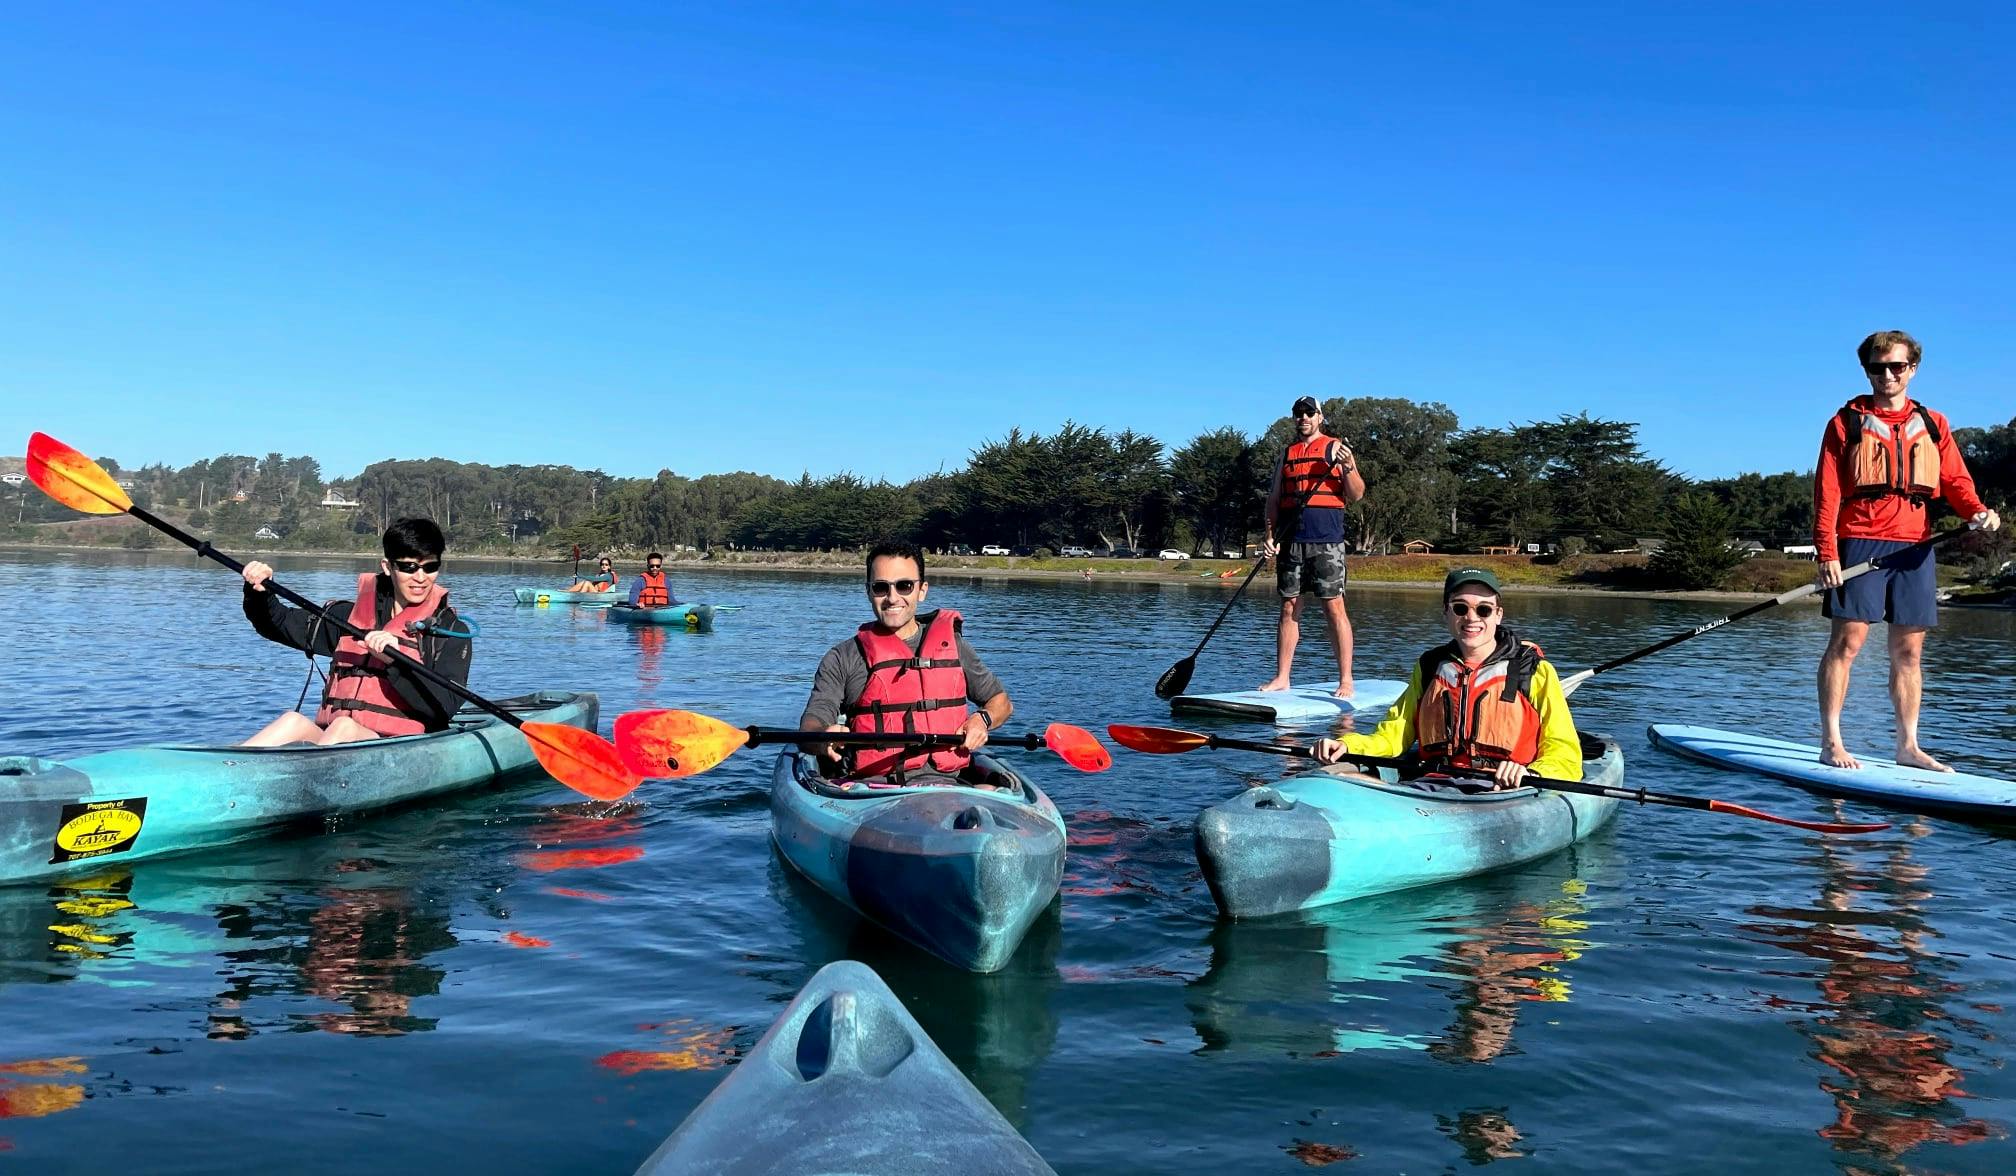 A few of the kayakers at the offsite